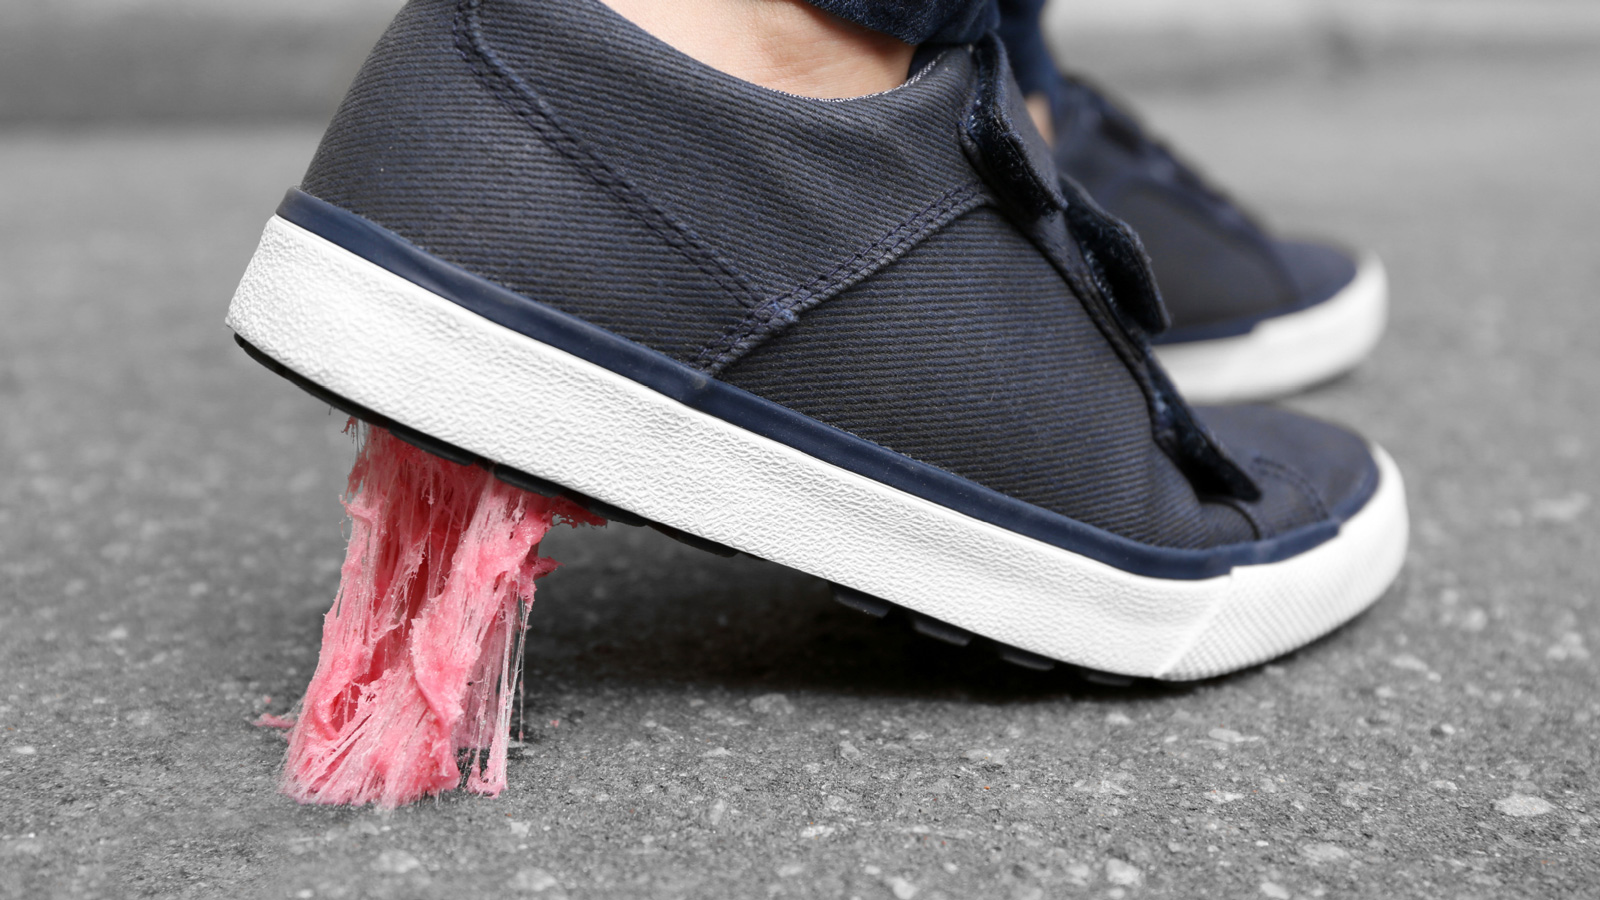 Chewing gum stuck to the sole of a shoe